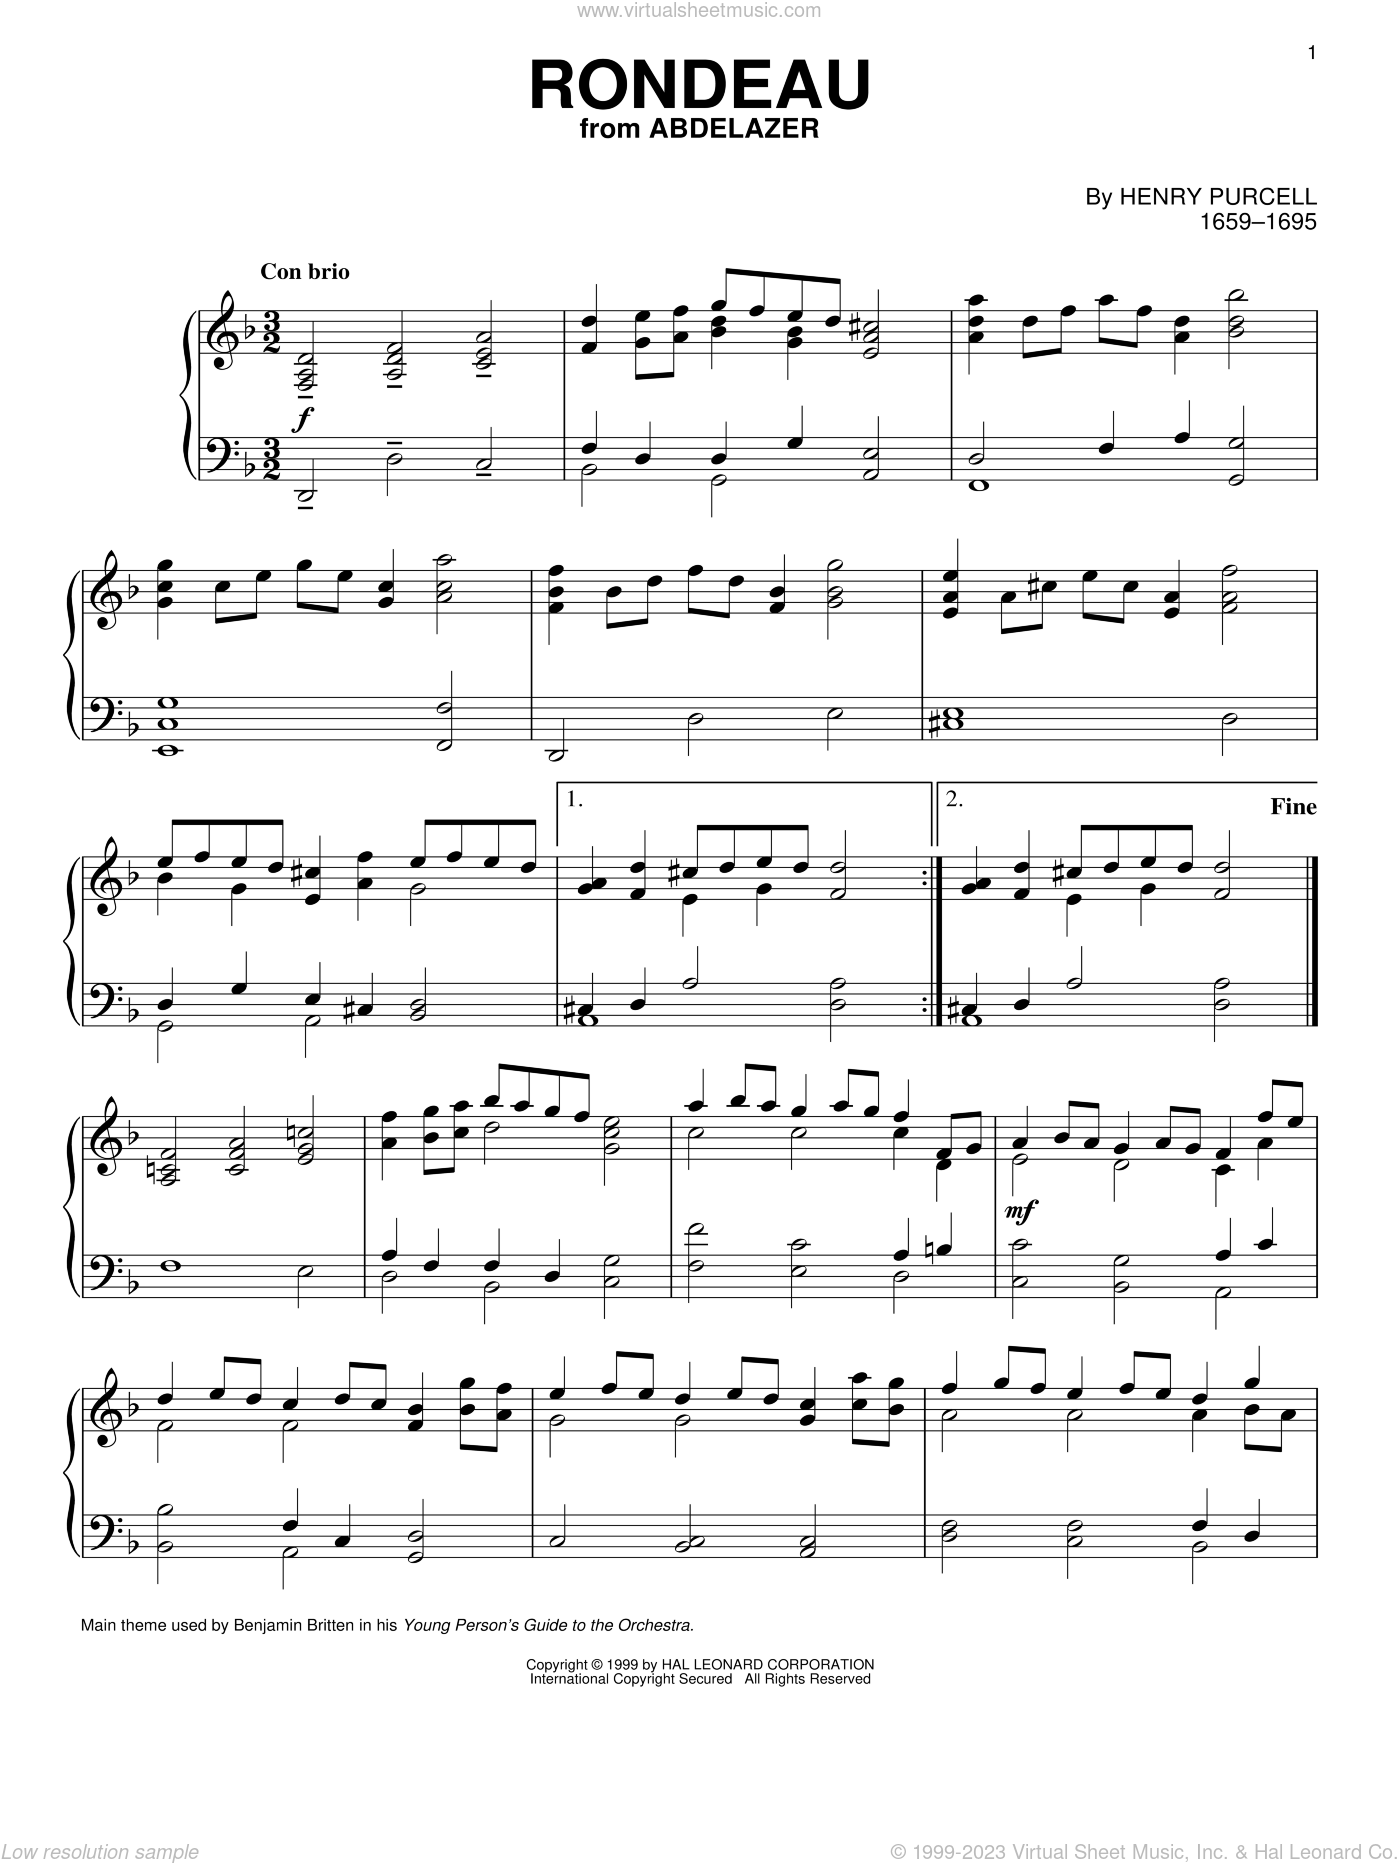 Purcell - Rondeau sheet music for piano solo [PDF-interactive]